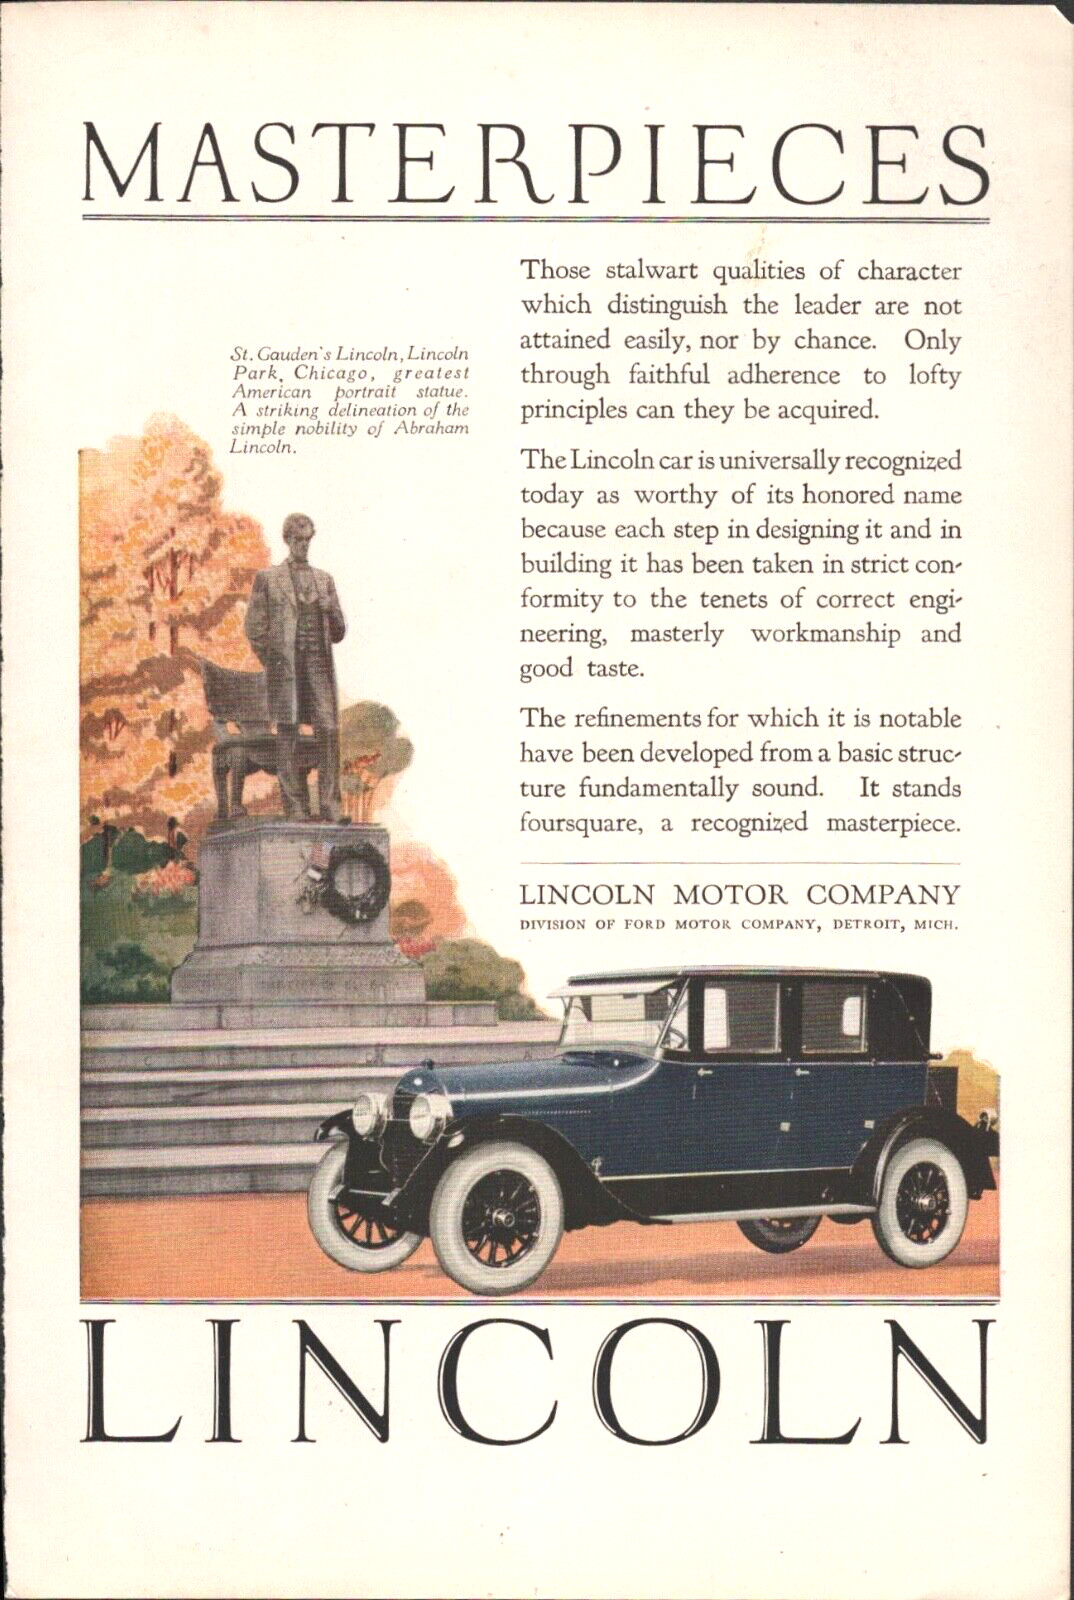 1924 LINCOLN MOTOR CO. (FORD) antique magazine advertisement ST. GAUDEN'S STATUE